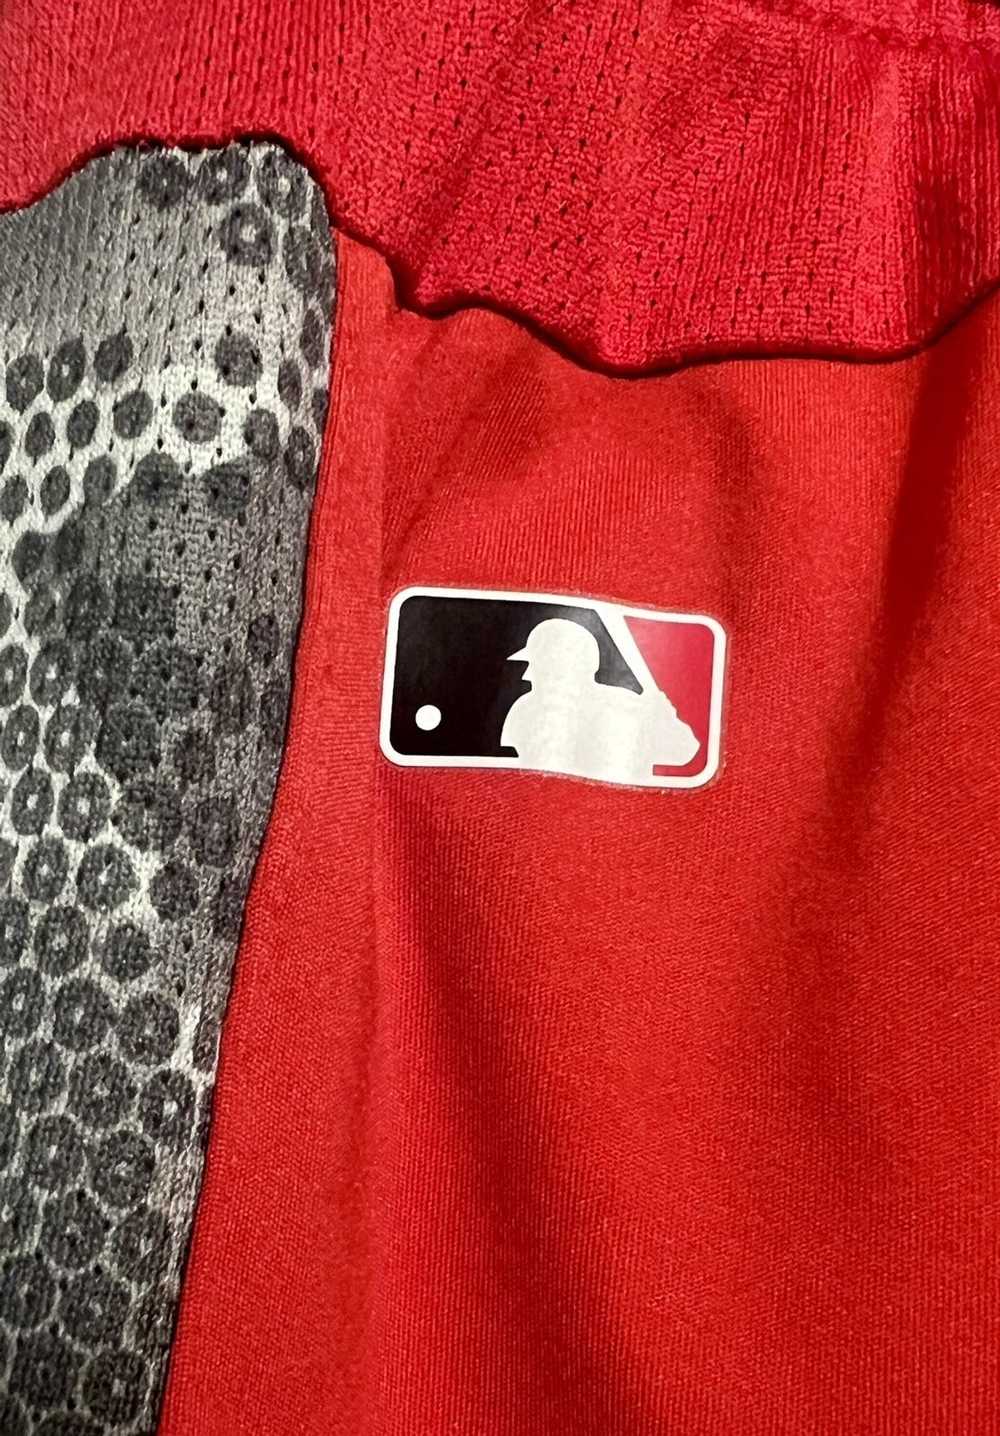 Mlb authentic collection nike - Gem